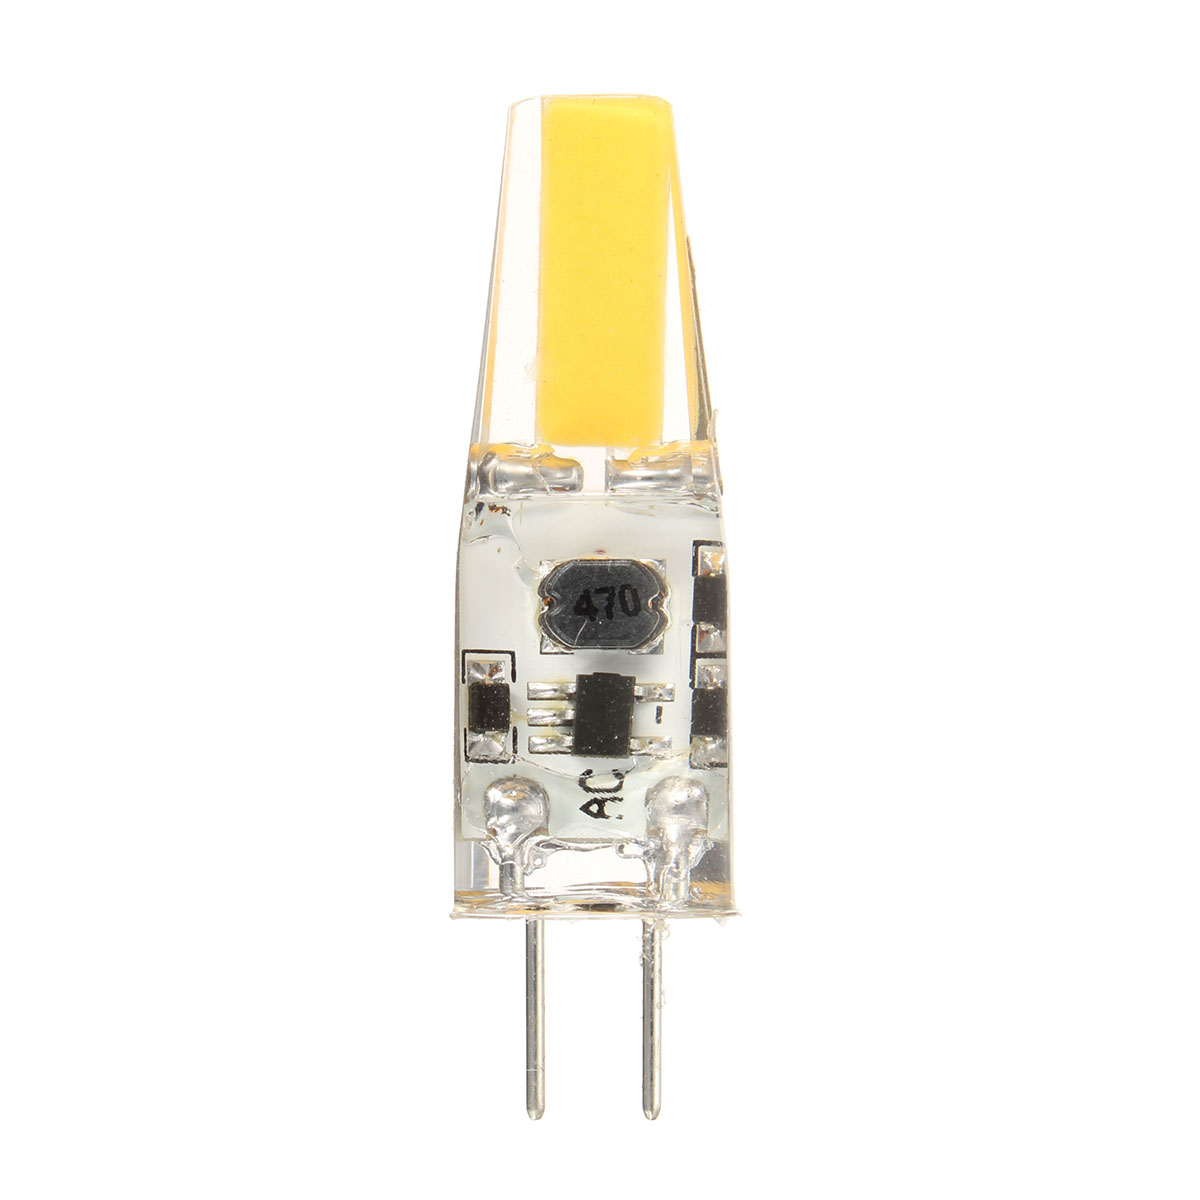 30X-DCAC12V-Dimmable-G4-2W-Warm-White-COB-LED-Bulb-Chandelier-Light-Replace-Halogen-Lamps-1454589-2